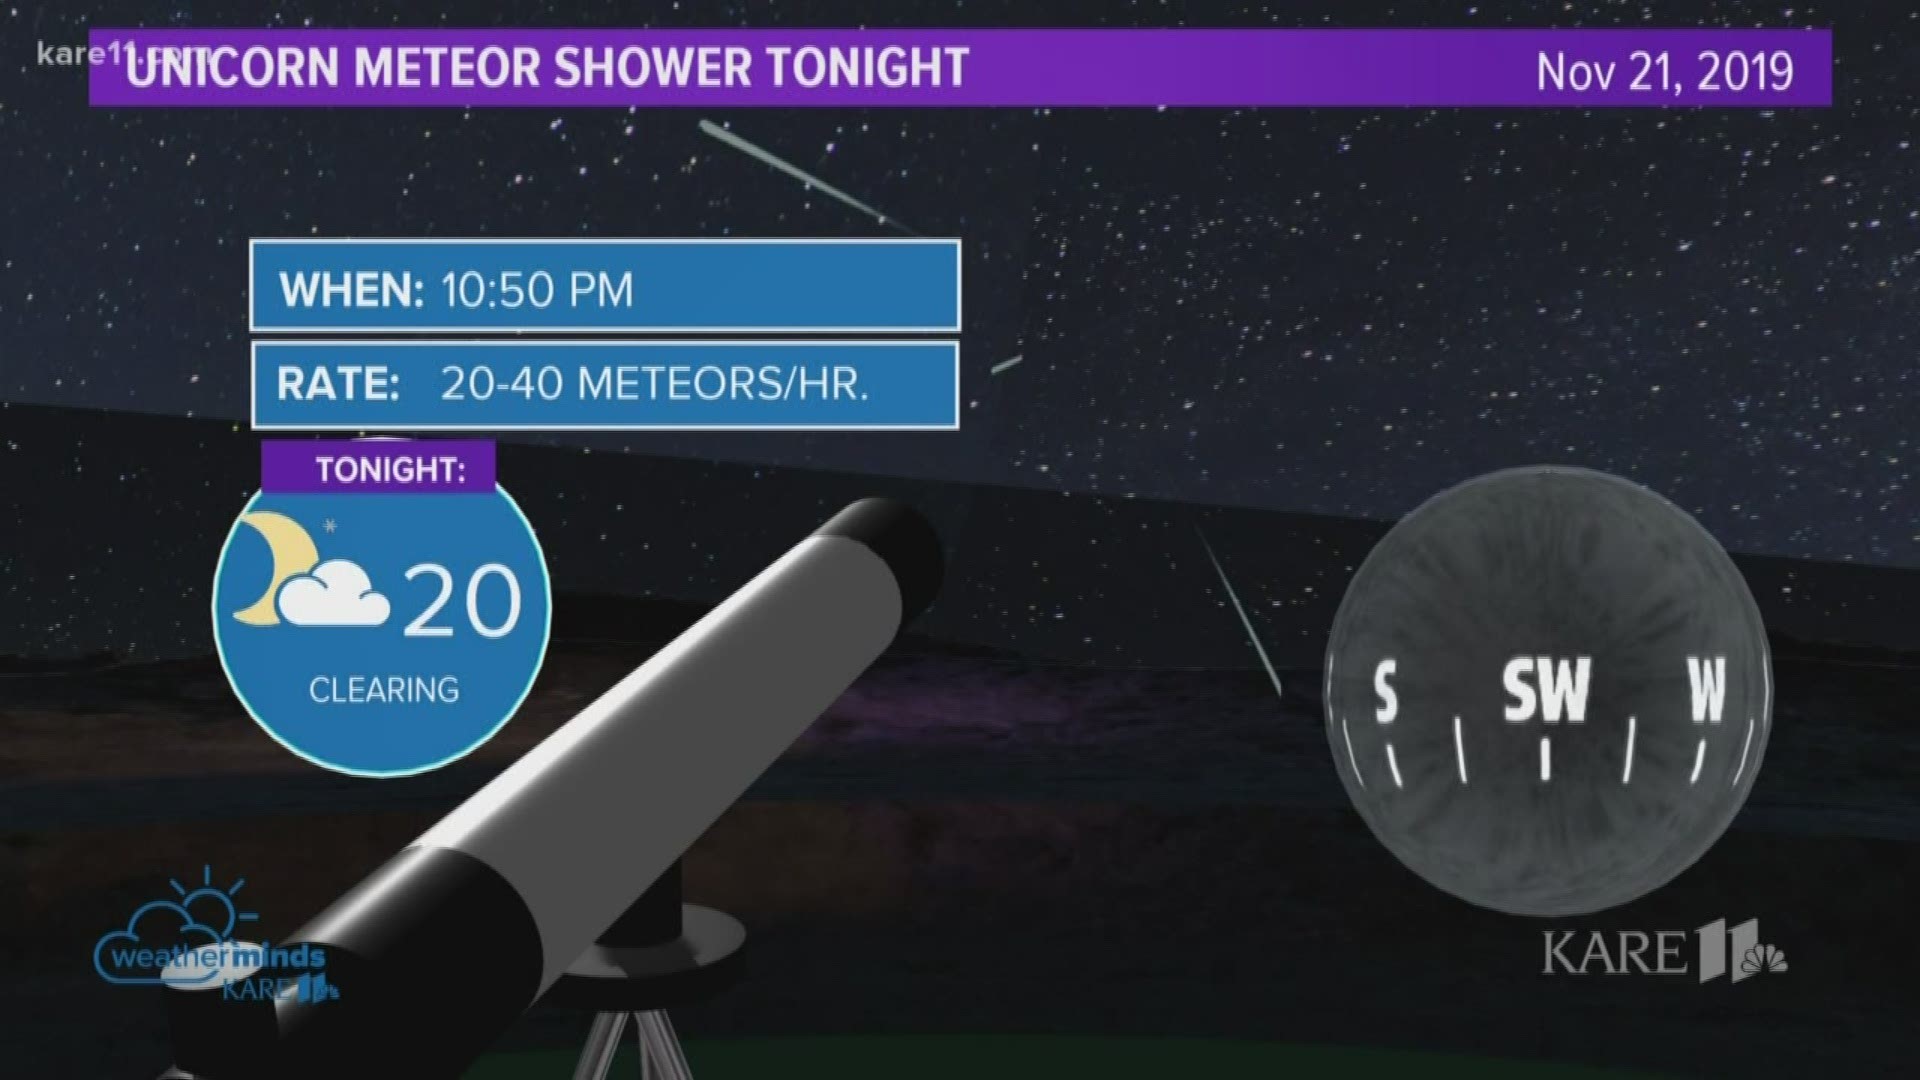 The so-called "Unicorn Meteor Shower" could be lighting up the night sky Thursday evening.